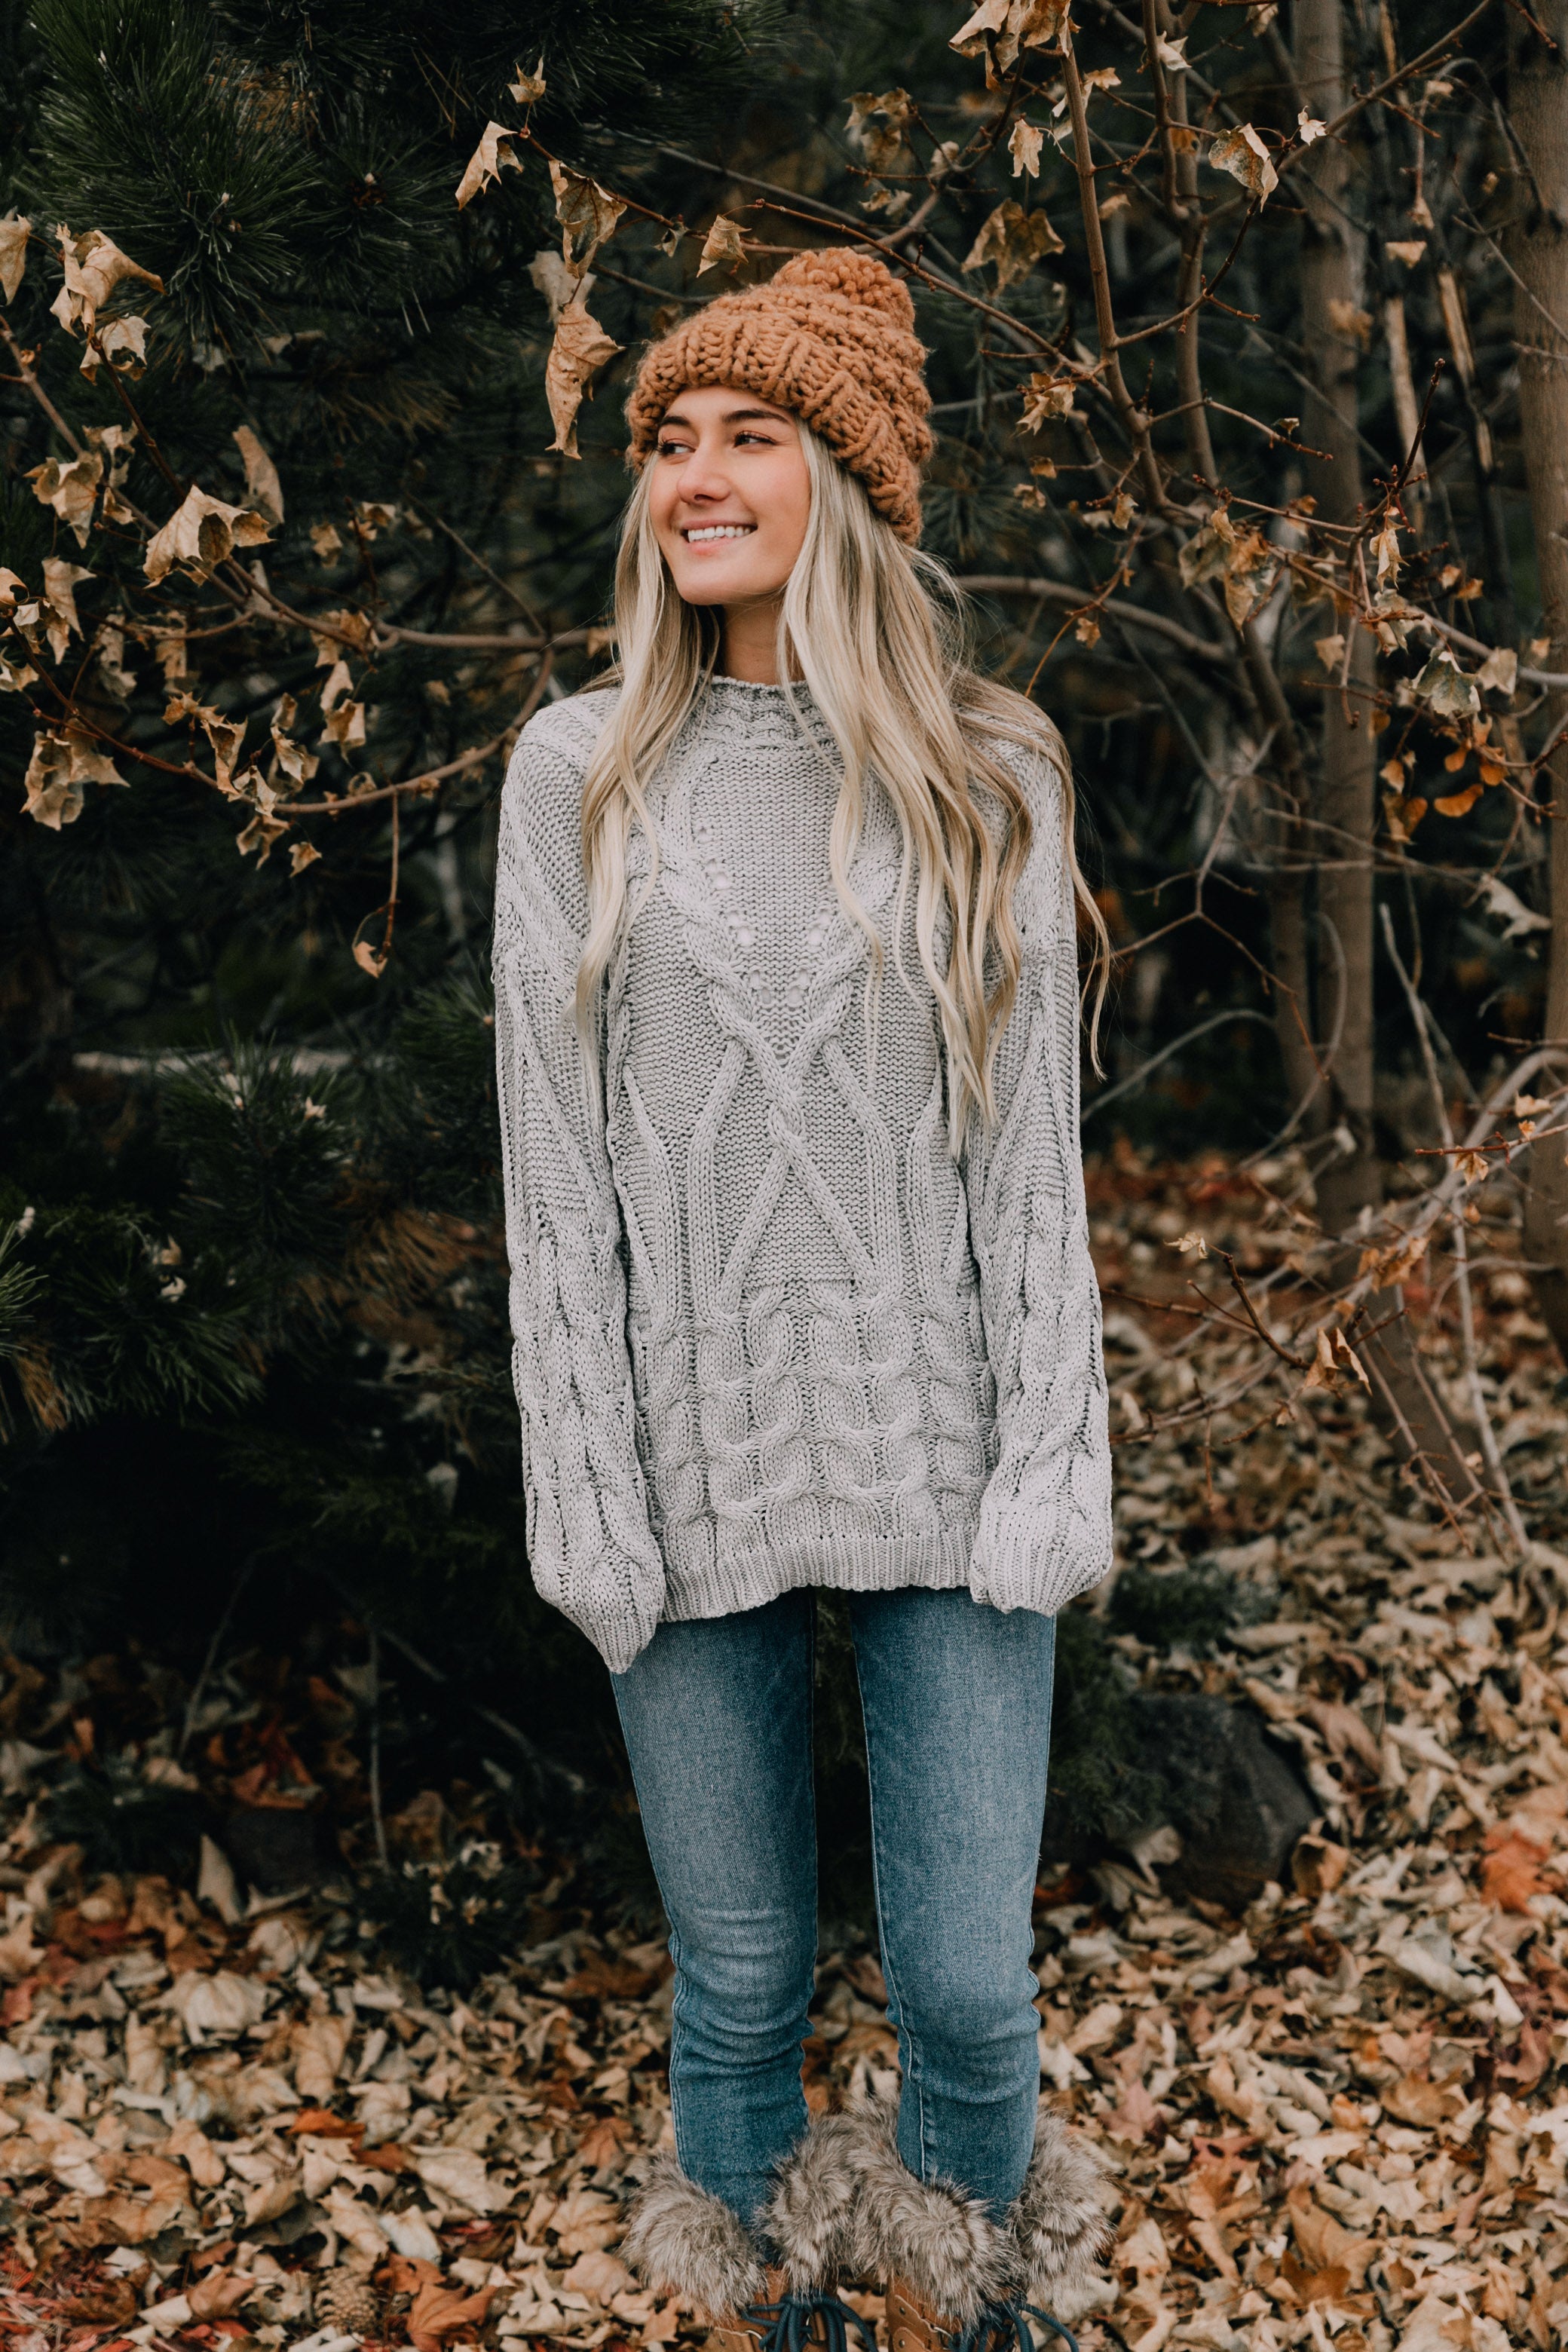 Classic Cable Knit Sweater